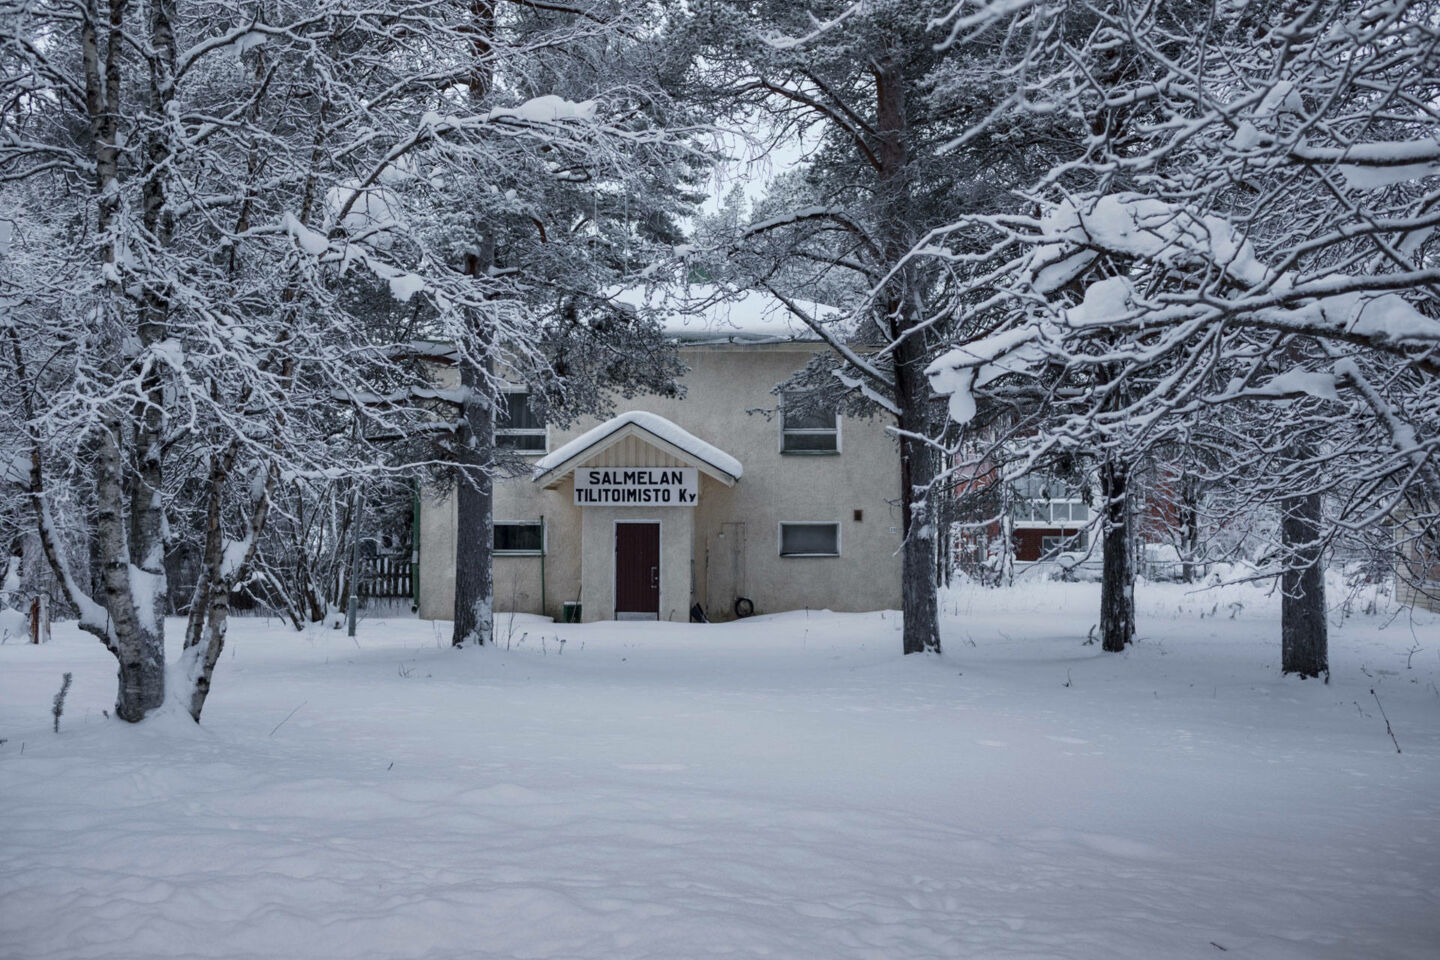 Old building in the retro town of Sodankylä, a filming location in Finnish Lapland